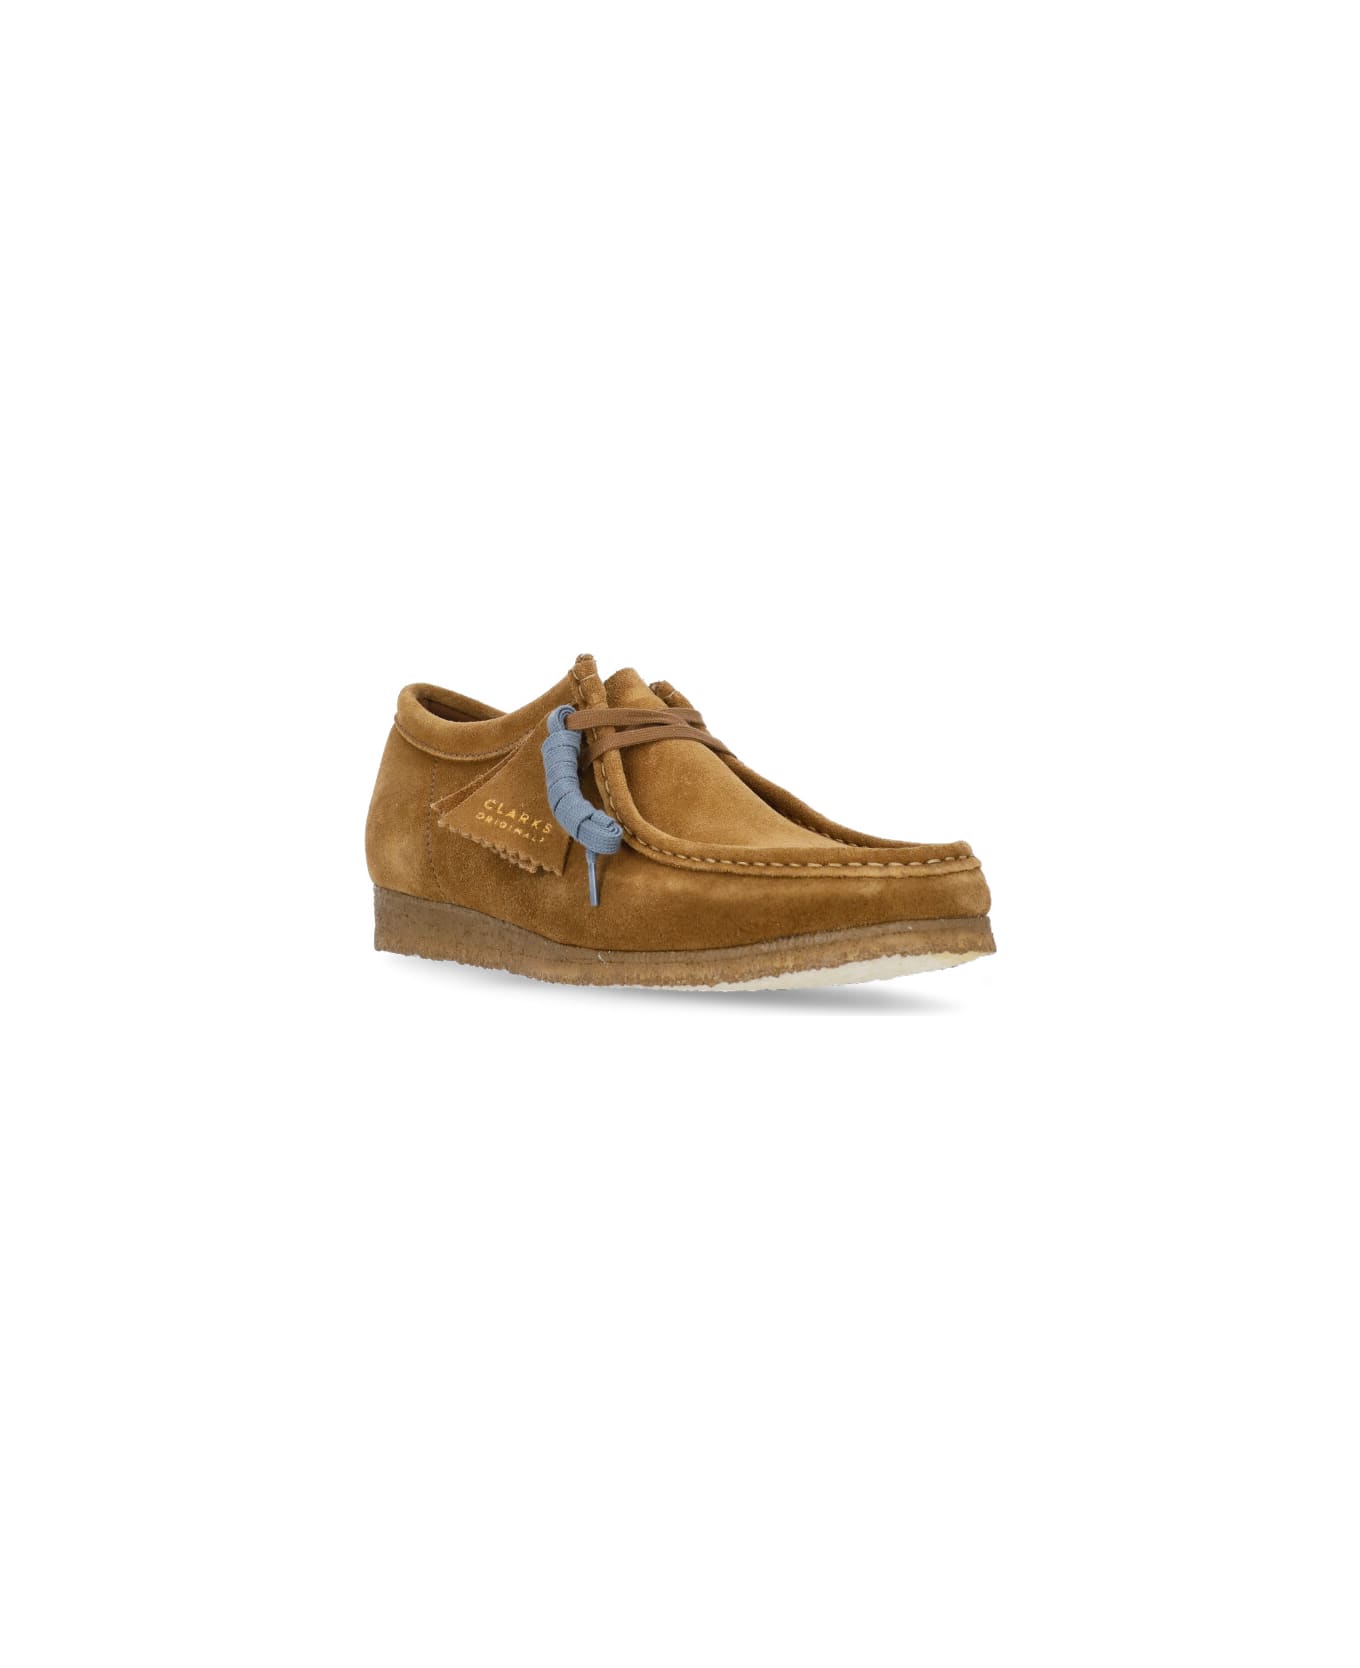 Clarks Wallabee Loafers - Brown